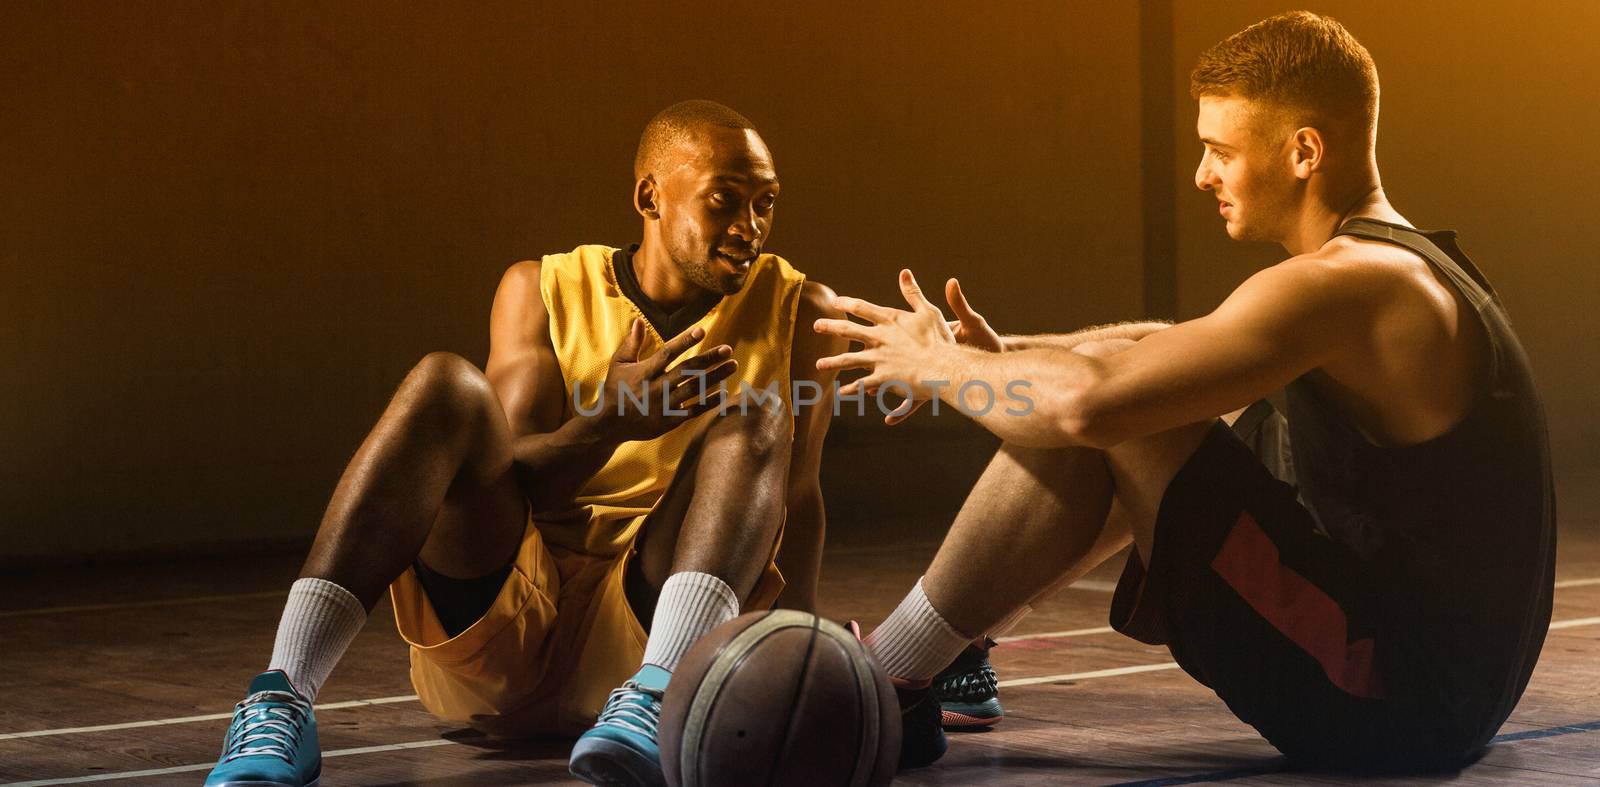 Basketball players sitting on floor talking together by Wavebreakmedia